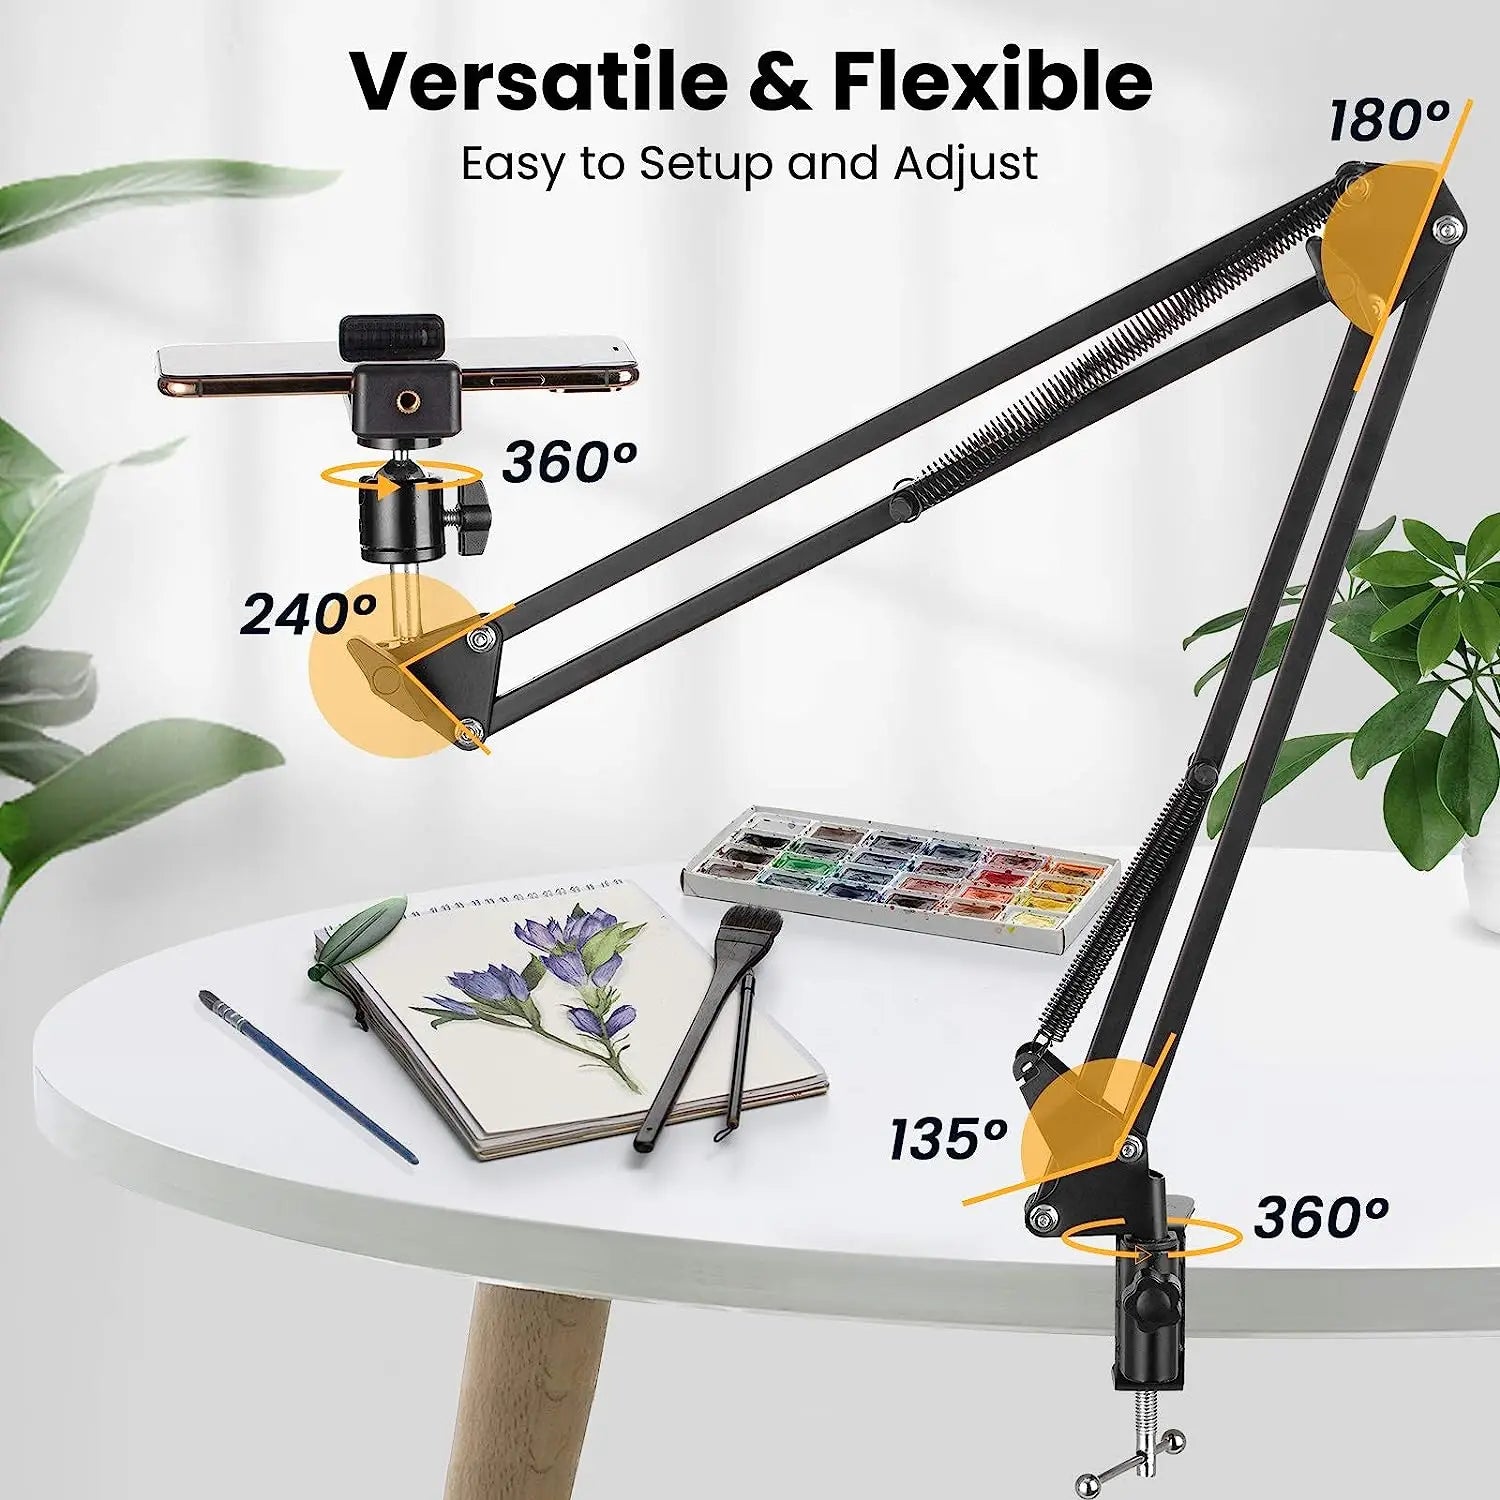 360-Degree Flexible Long Arm Phone Tripod Stand with Bluetooth Remote Control  ourlum.com   